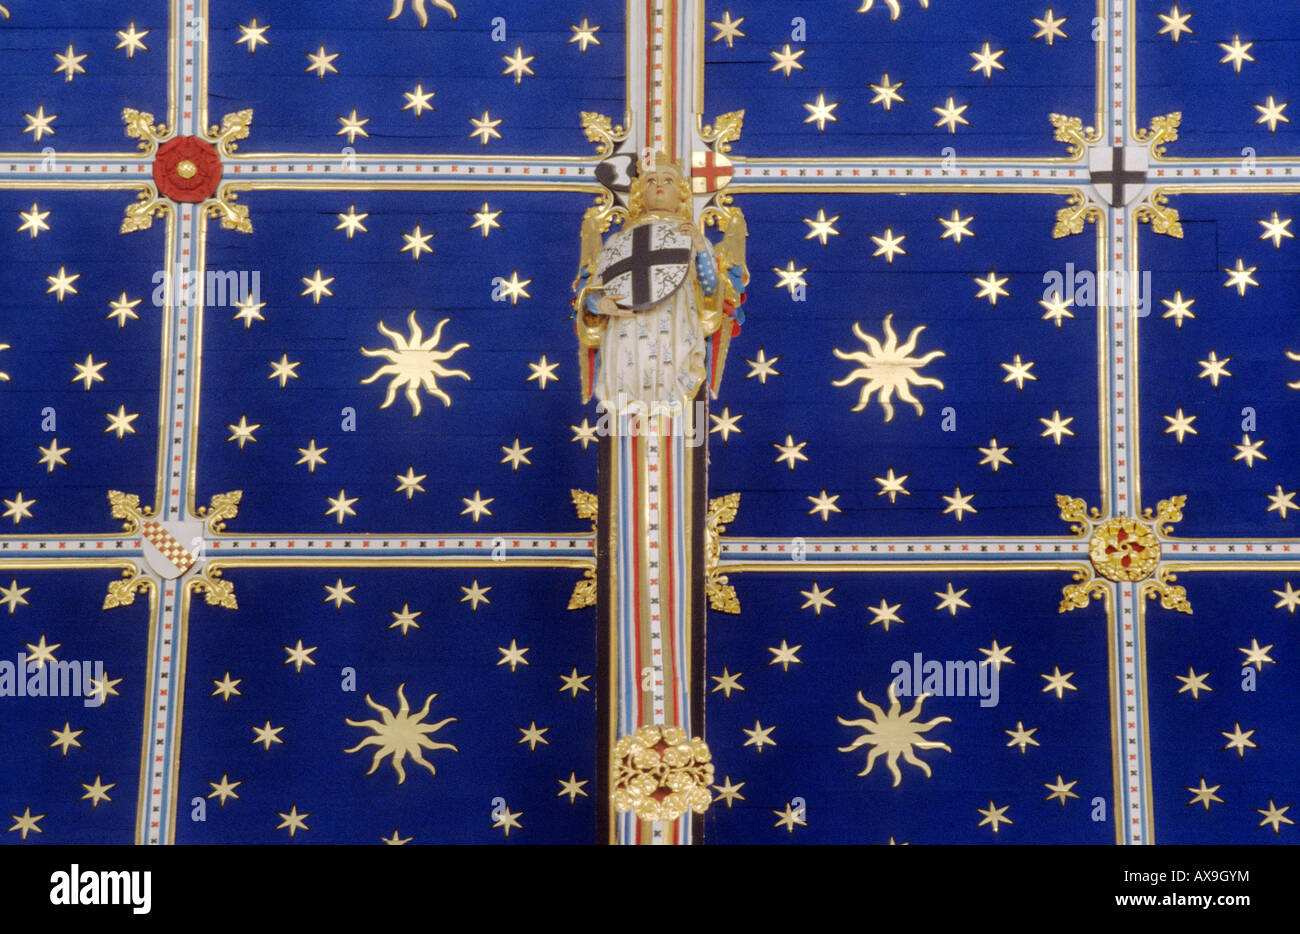 Carlisle Cathedral Cumbria blue painted vaulted ceiling stars angel heraldic devices heraldry Medieval English architecture Stock Photo